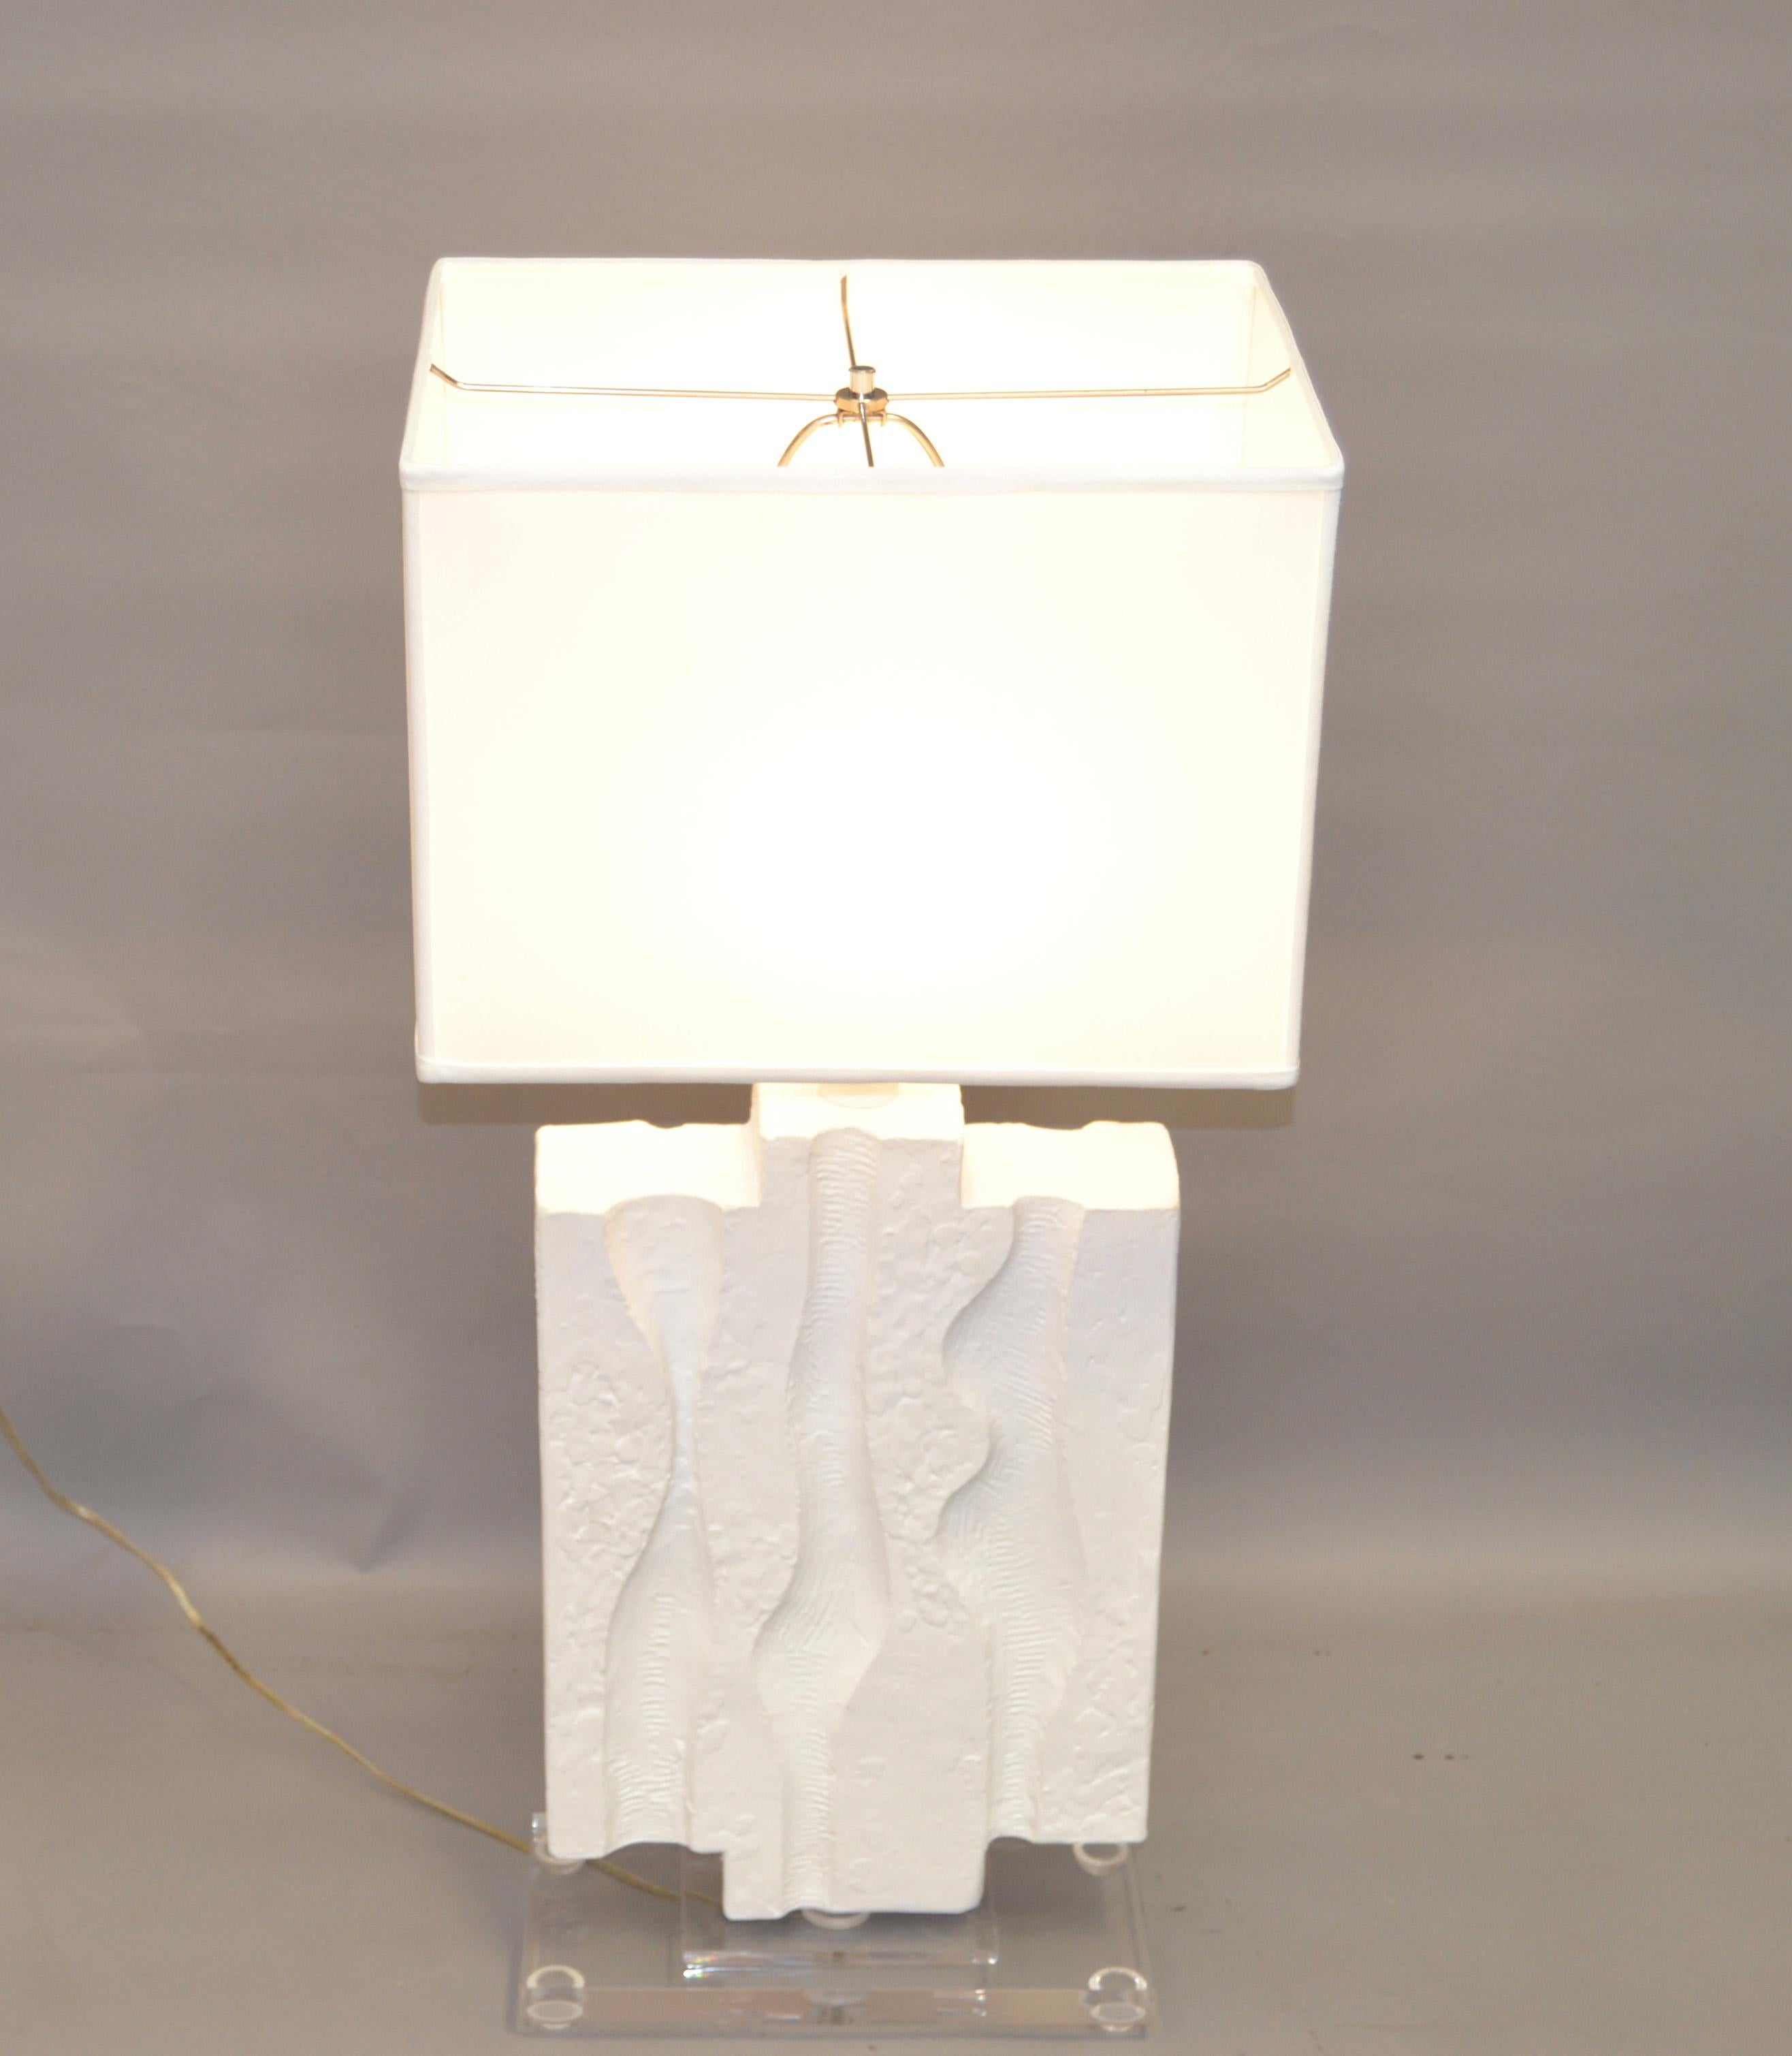 American Iconic Sculptural Textured White Gesso Finish Plaster Table Lamp Acrylic Base For Sale